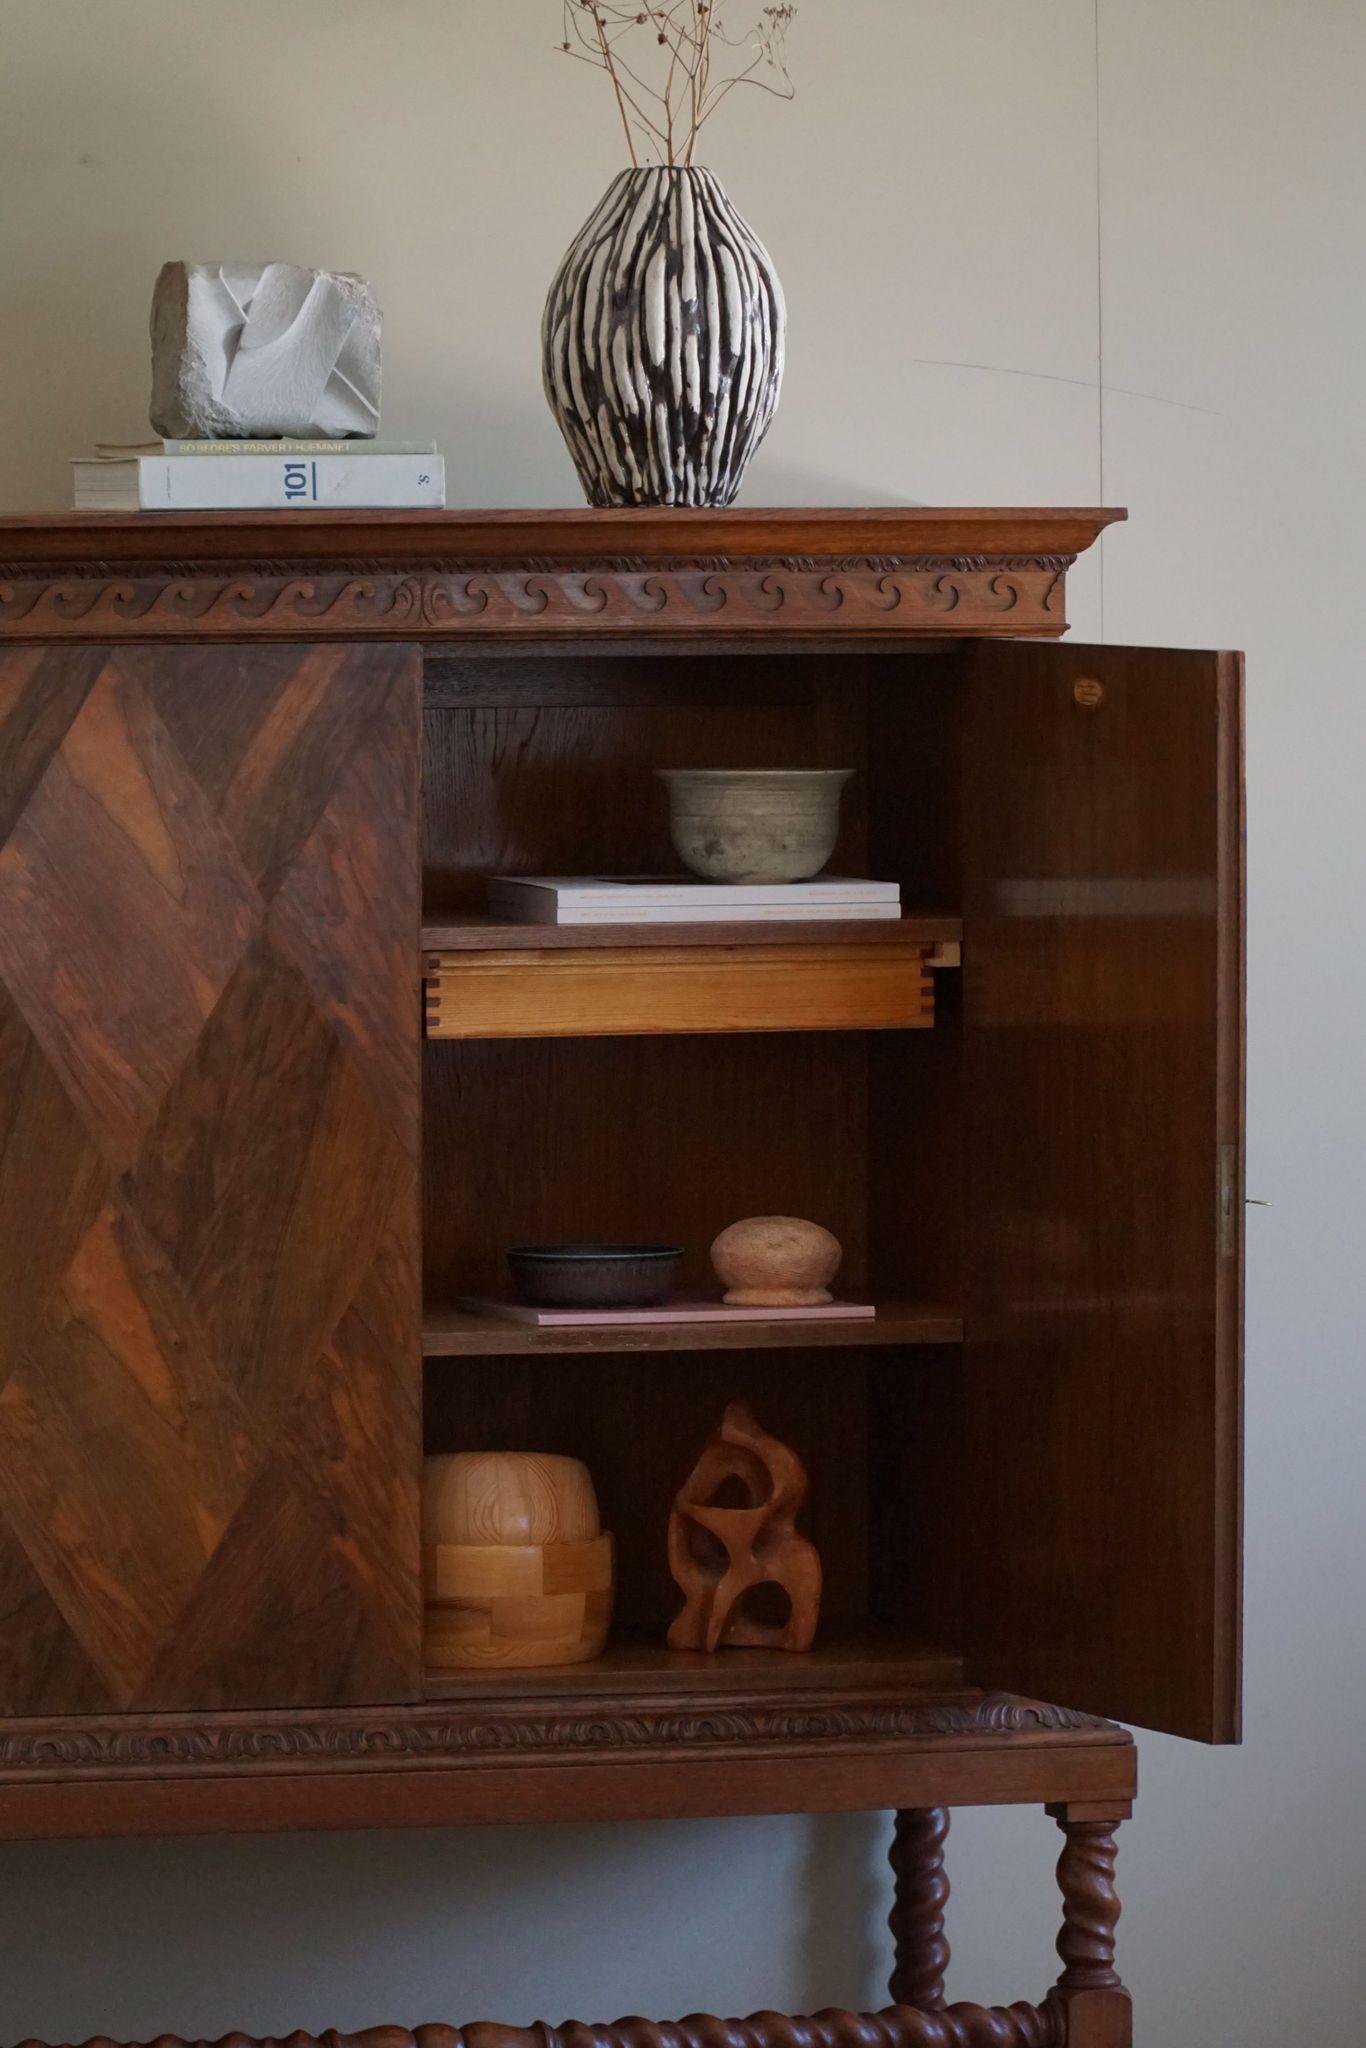 Hand-Crafted Otto Meyer, Harlequin Cabinet in Nutwood, Danish Modern, Made in 1926 For Sale